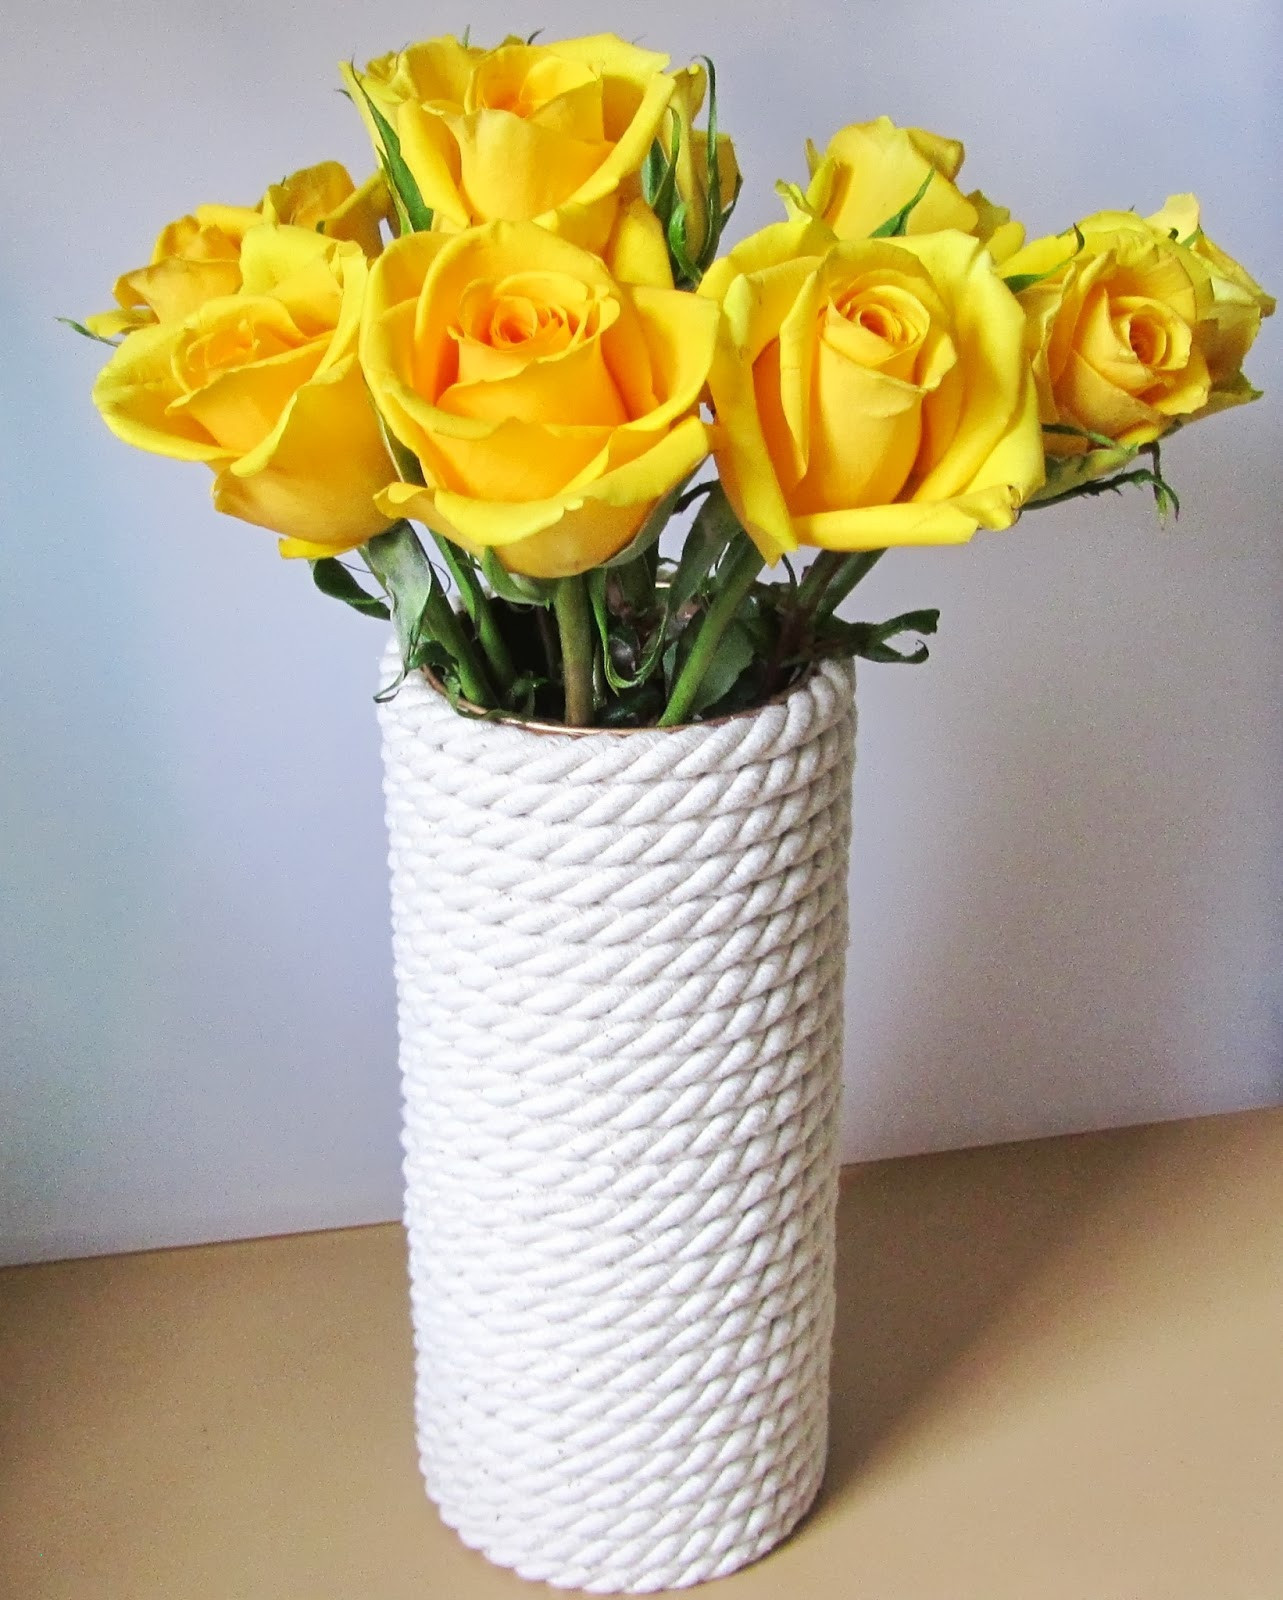 13 Lovable Flowers with Vase Delivery Uk 2024 free download flowers with vase delivery uk of sophisticated yellow flower image natural zoom with regard to nautical centerpieceh vases vase savei 0d for flowers uk filler inspiration yellow flower garla